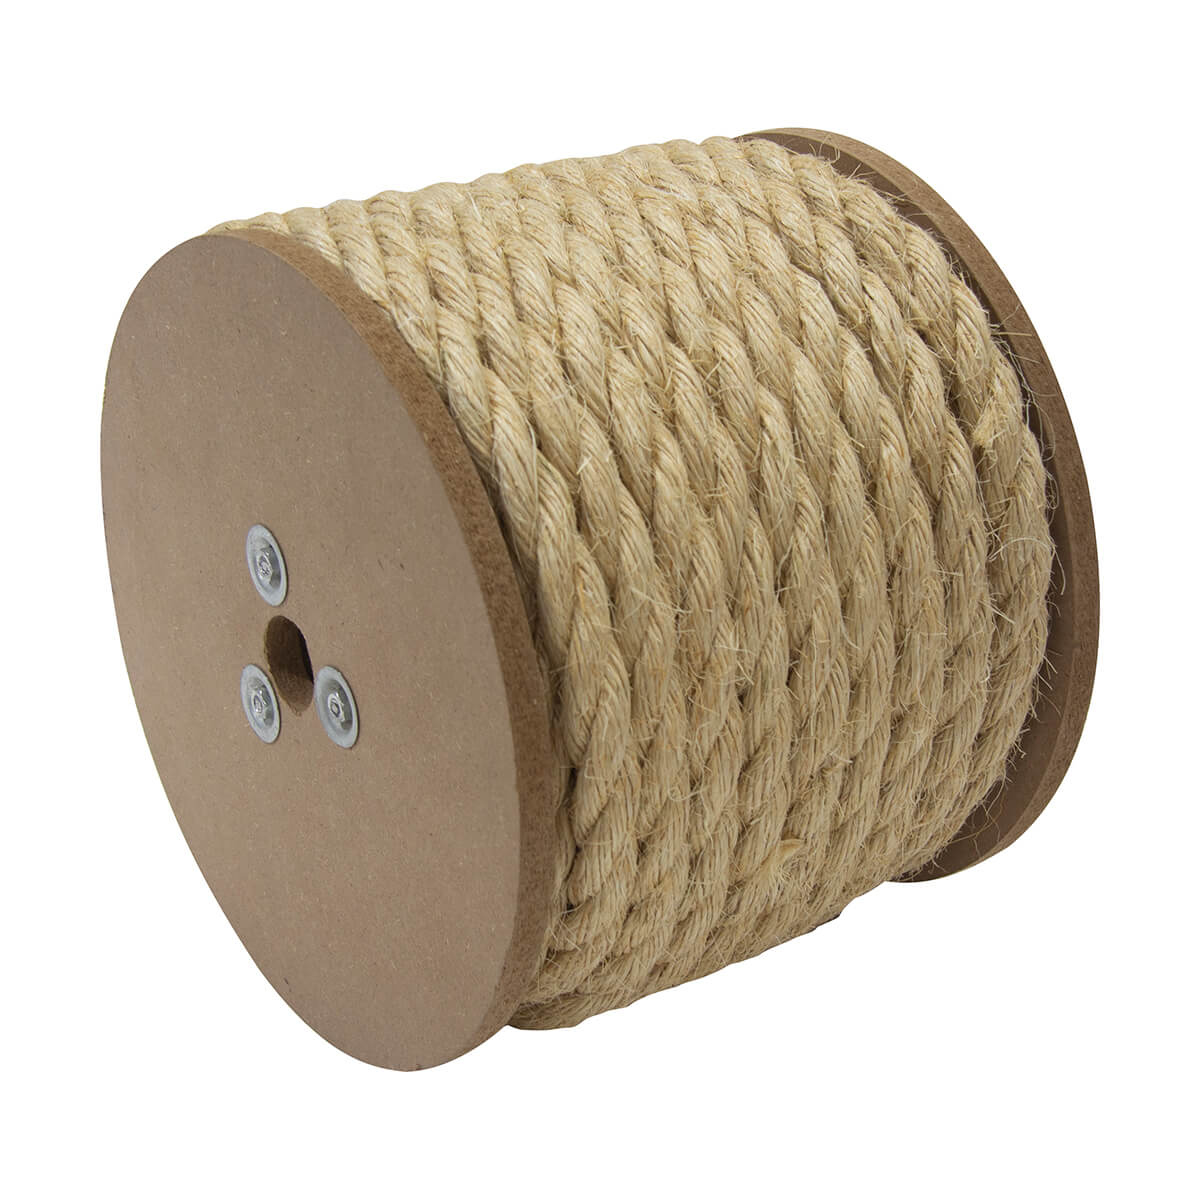 Twisted Sisal Rope - 3/4-in - Price Per ft